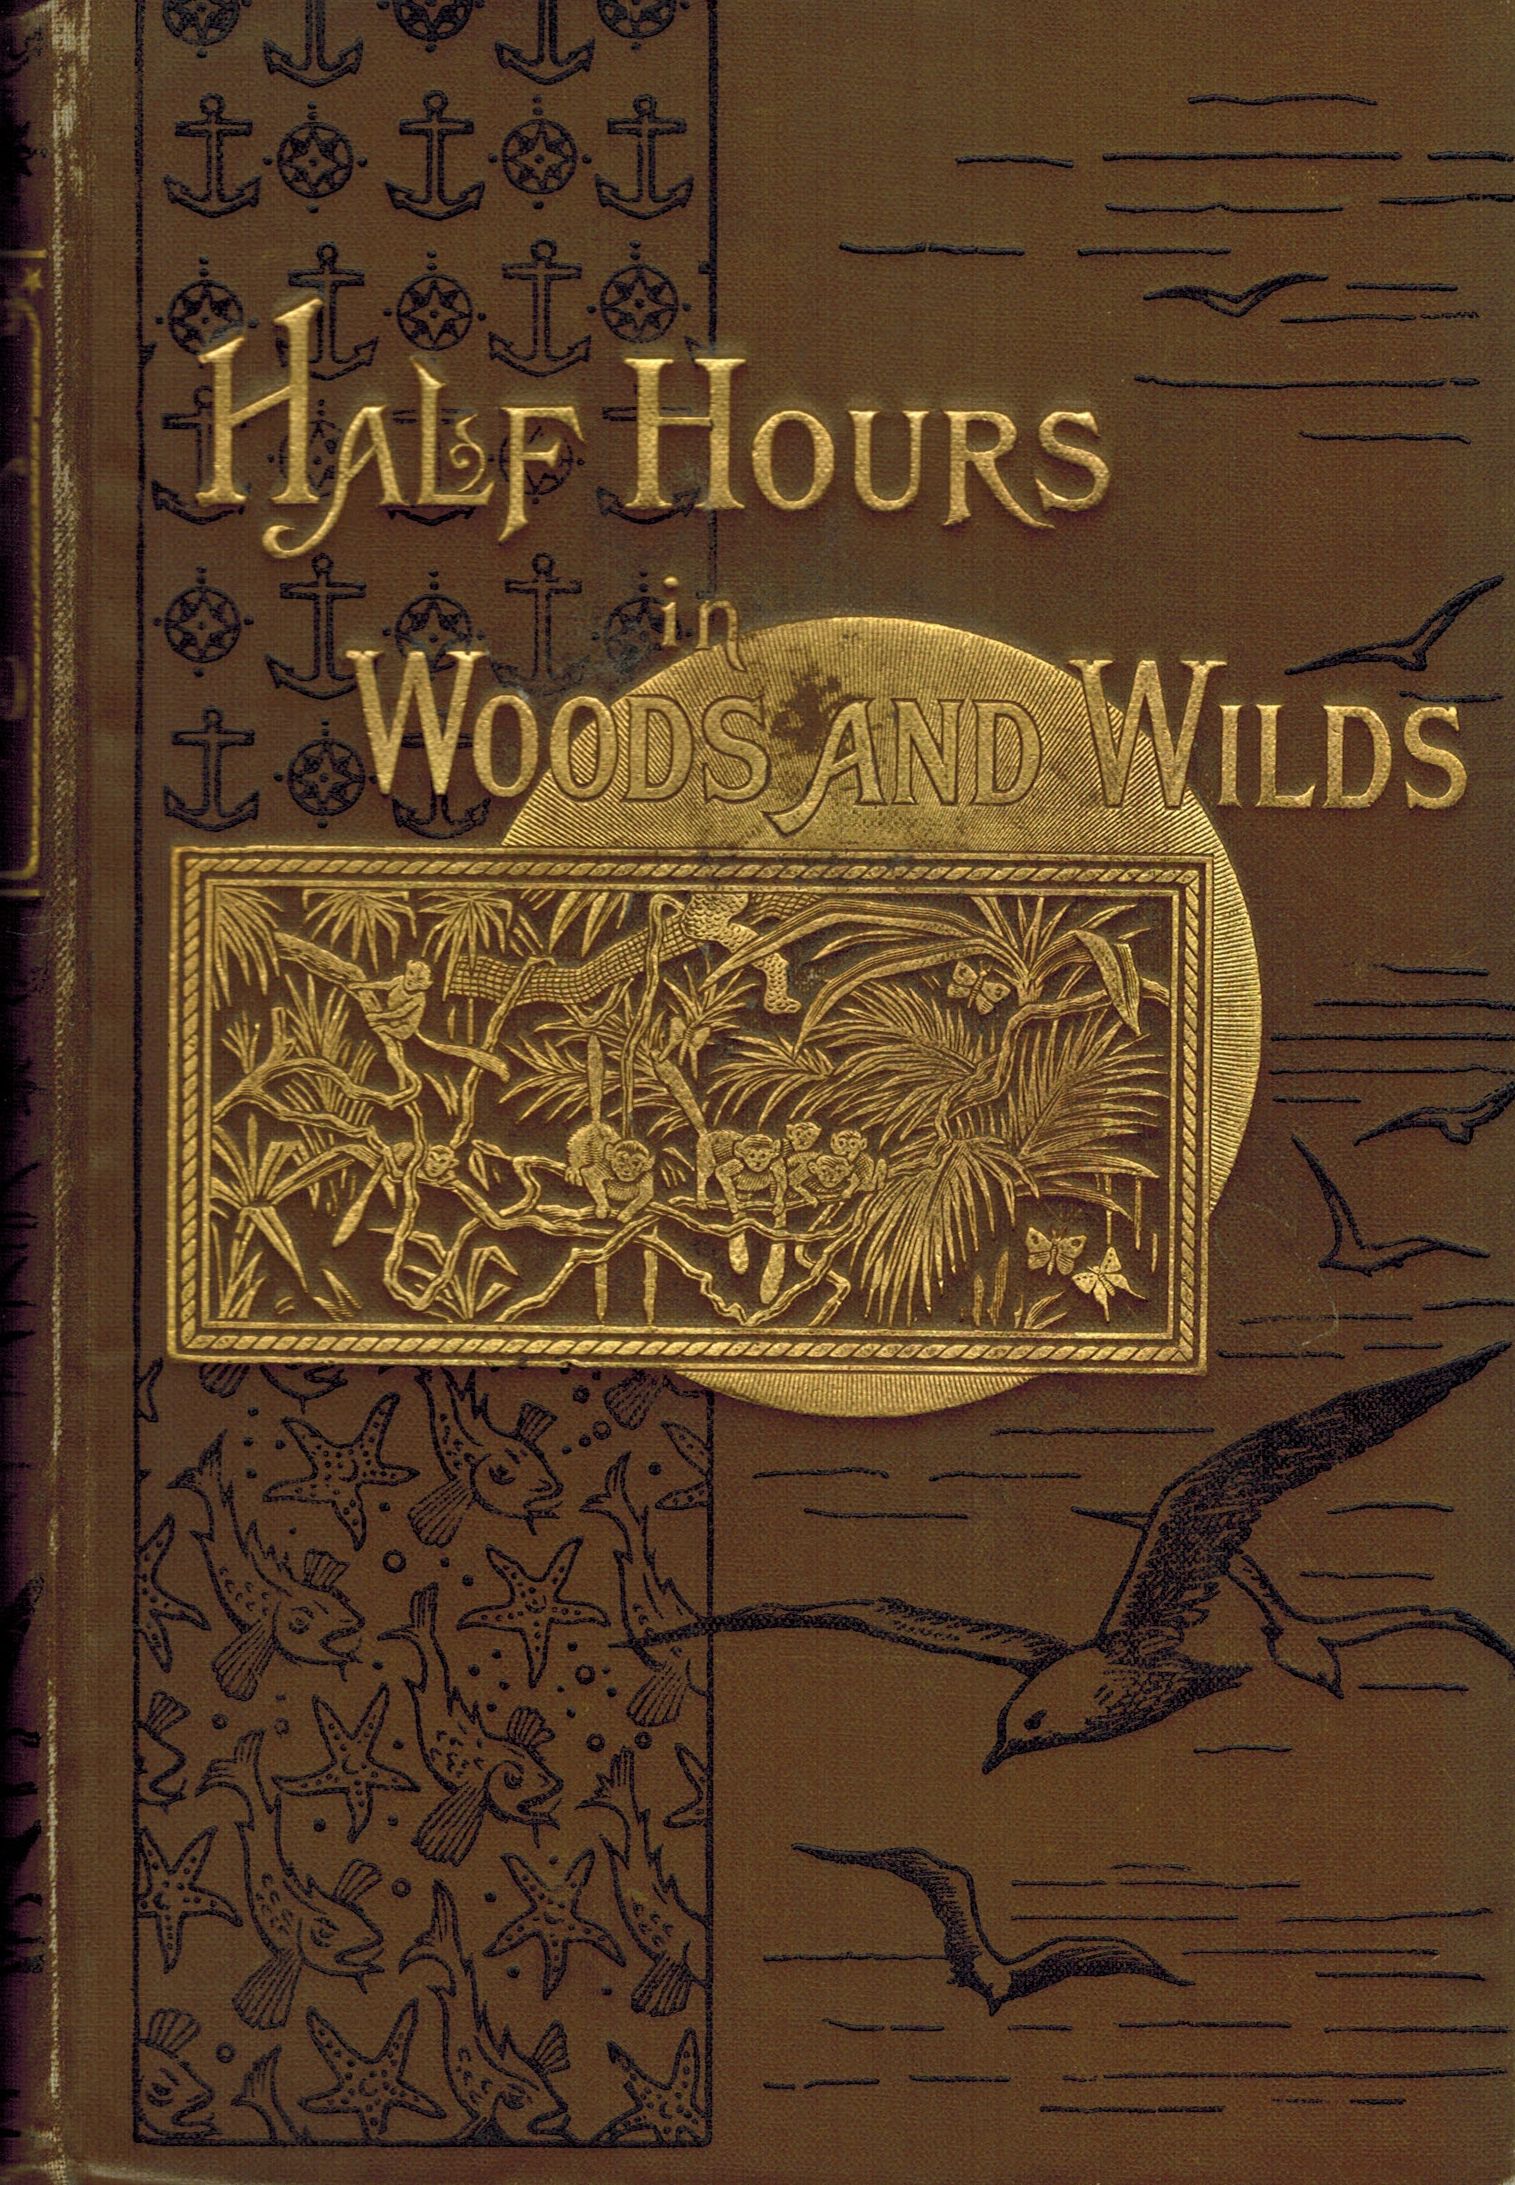 The Half Hour Library  Half Hours in woods and wilds 